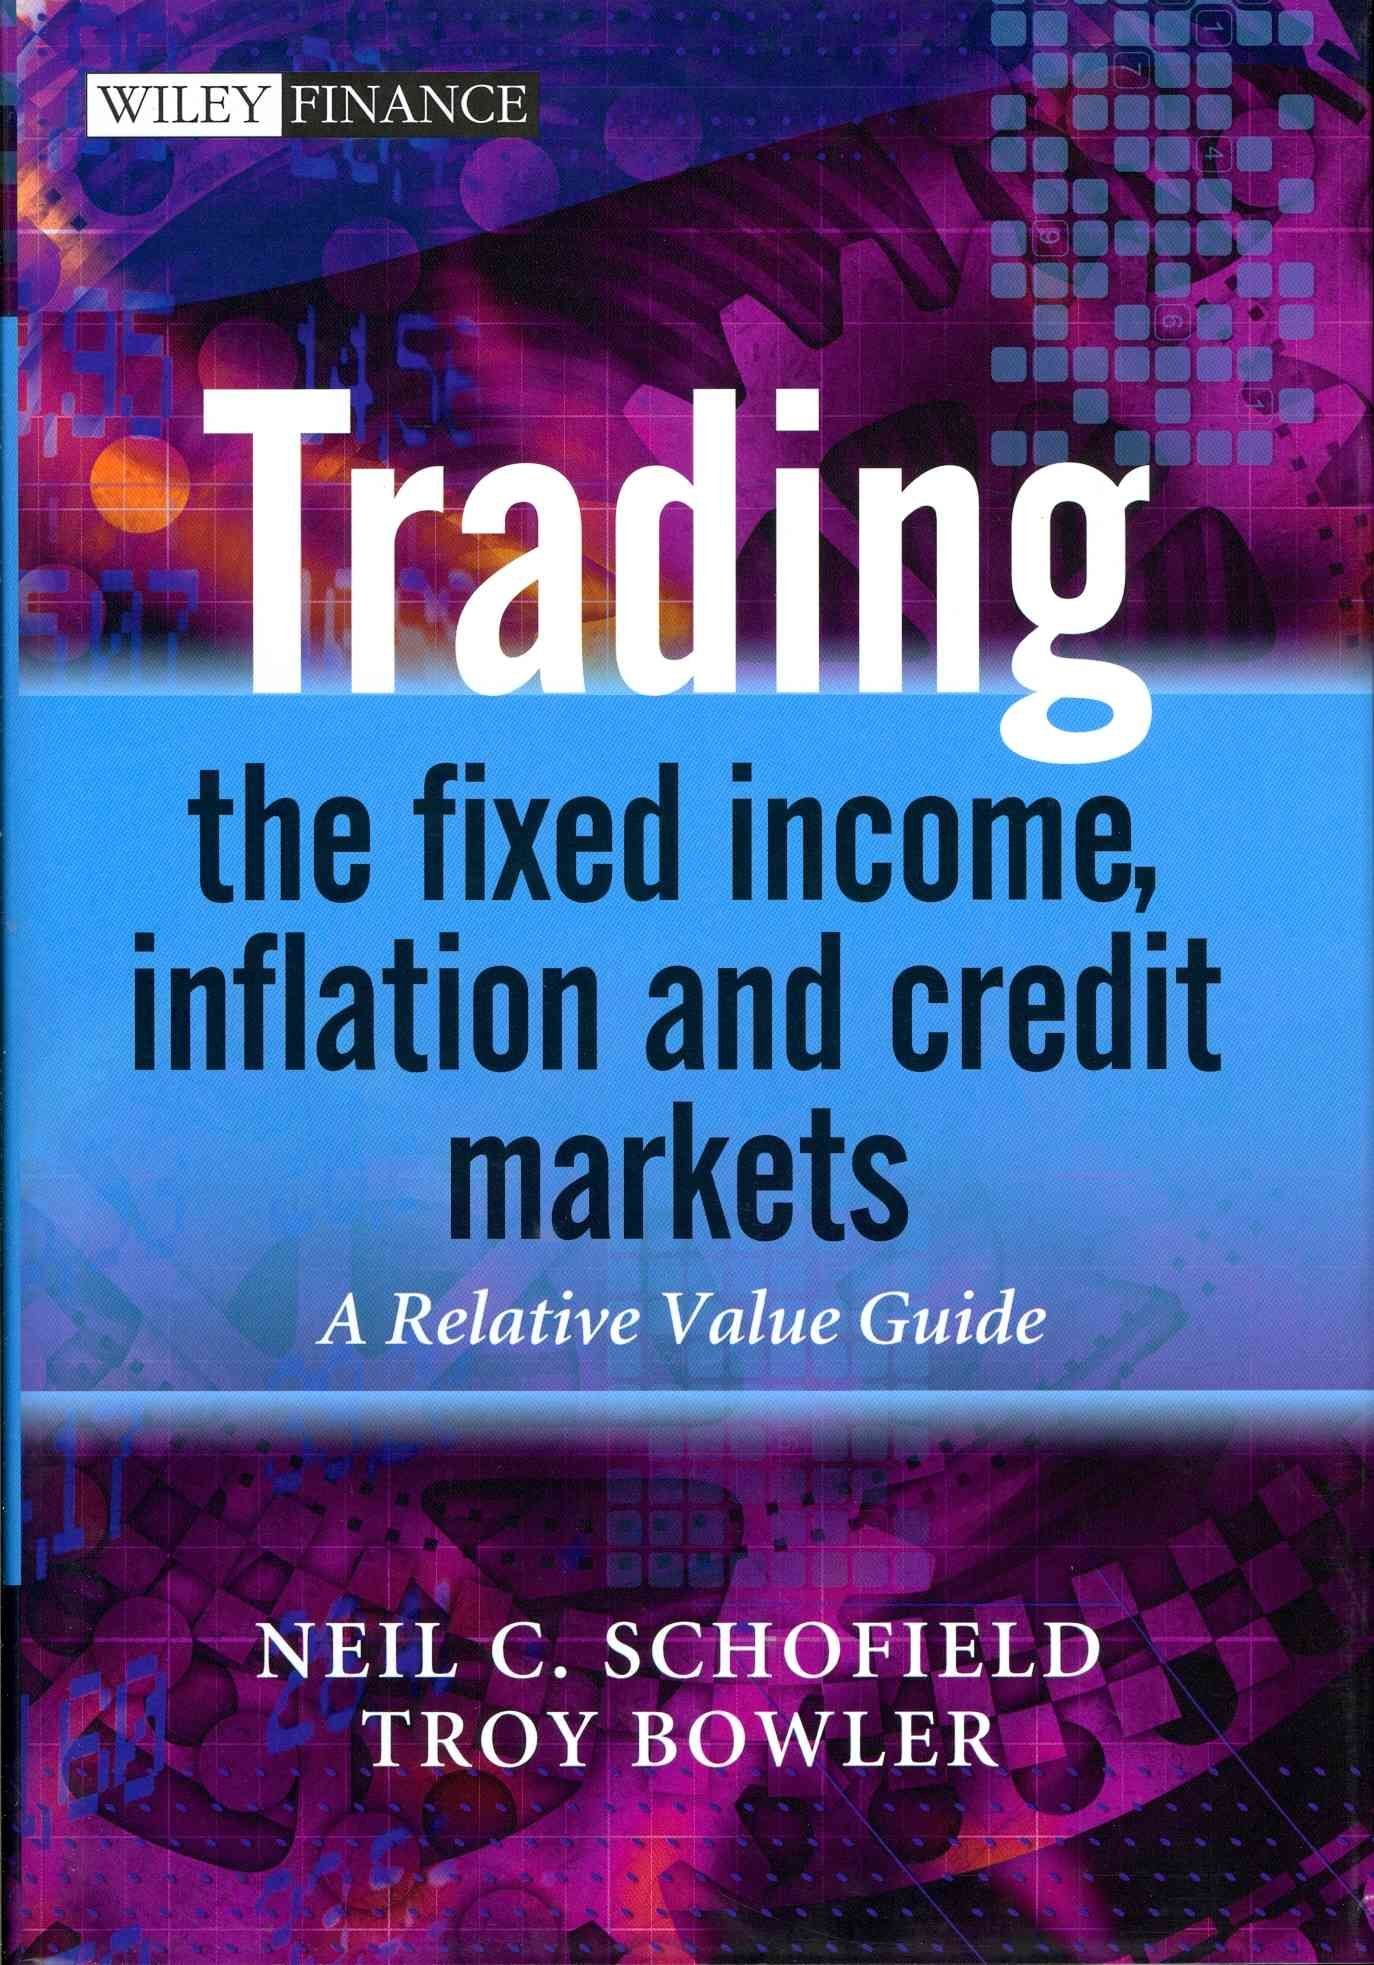 Trading the Fixed Income, Inflation and Credit Markets - A Relative Value Guide